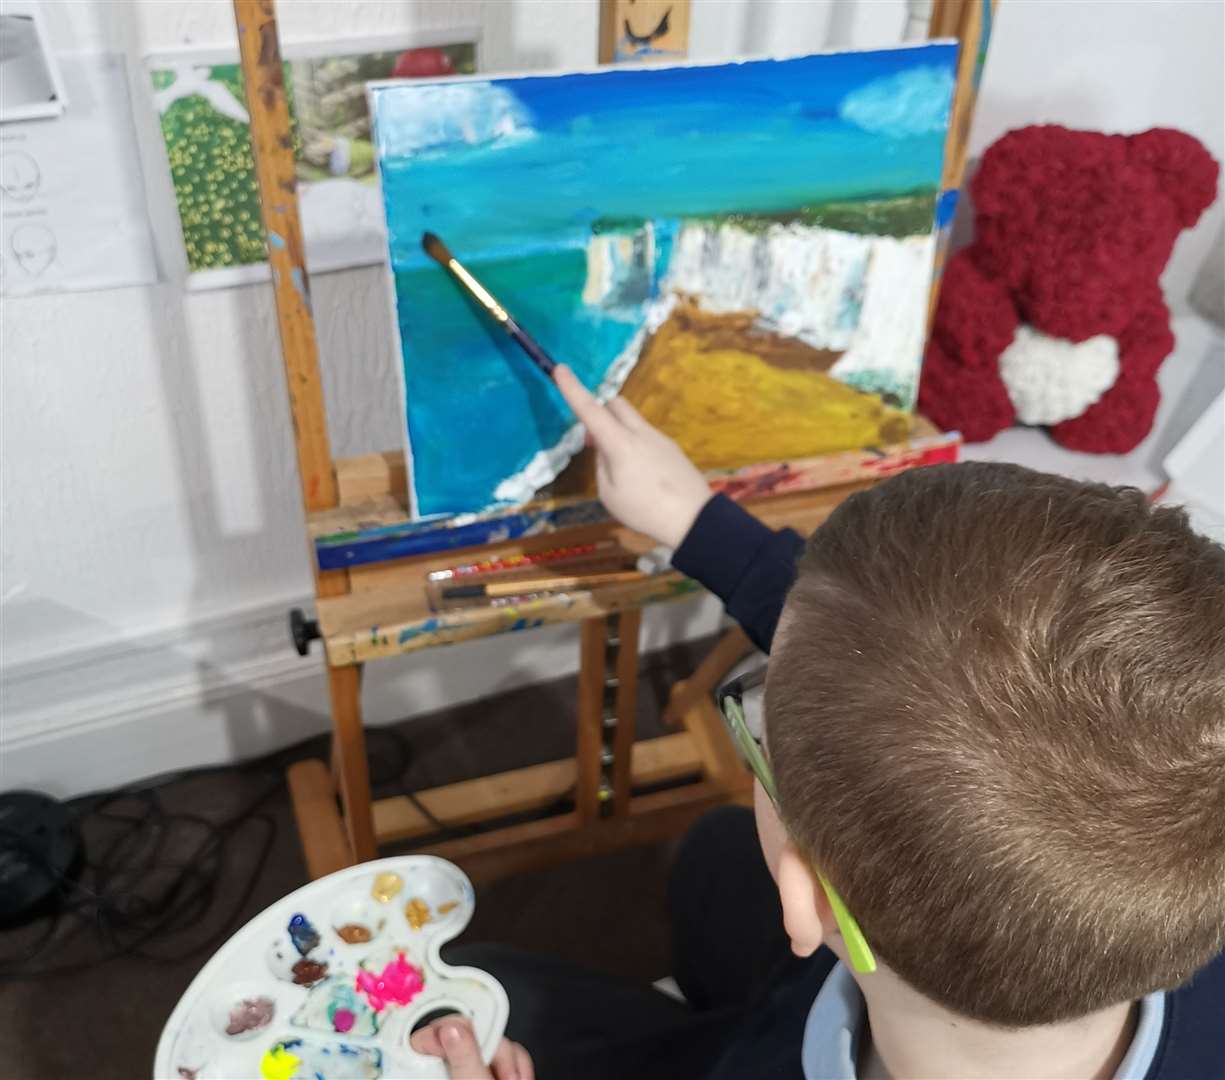 Max is painting an image of Botany Bay which he will sell to raise money for charity